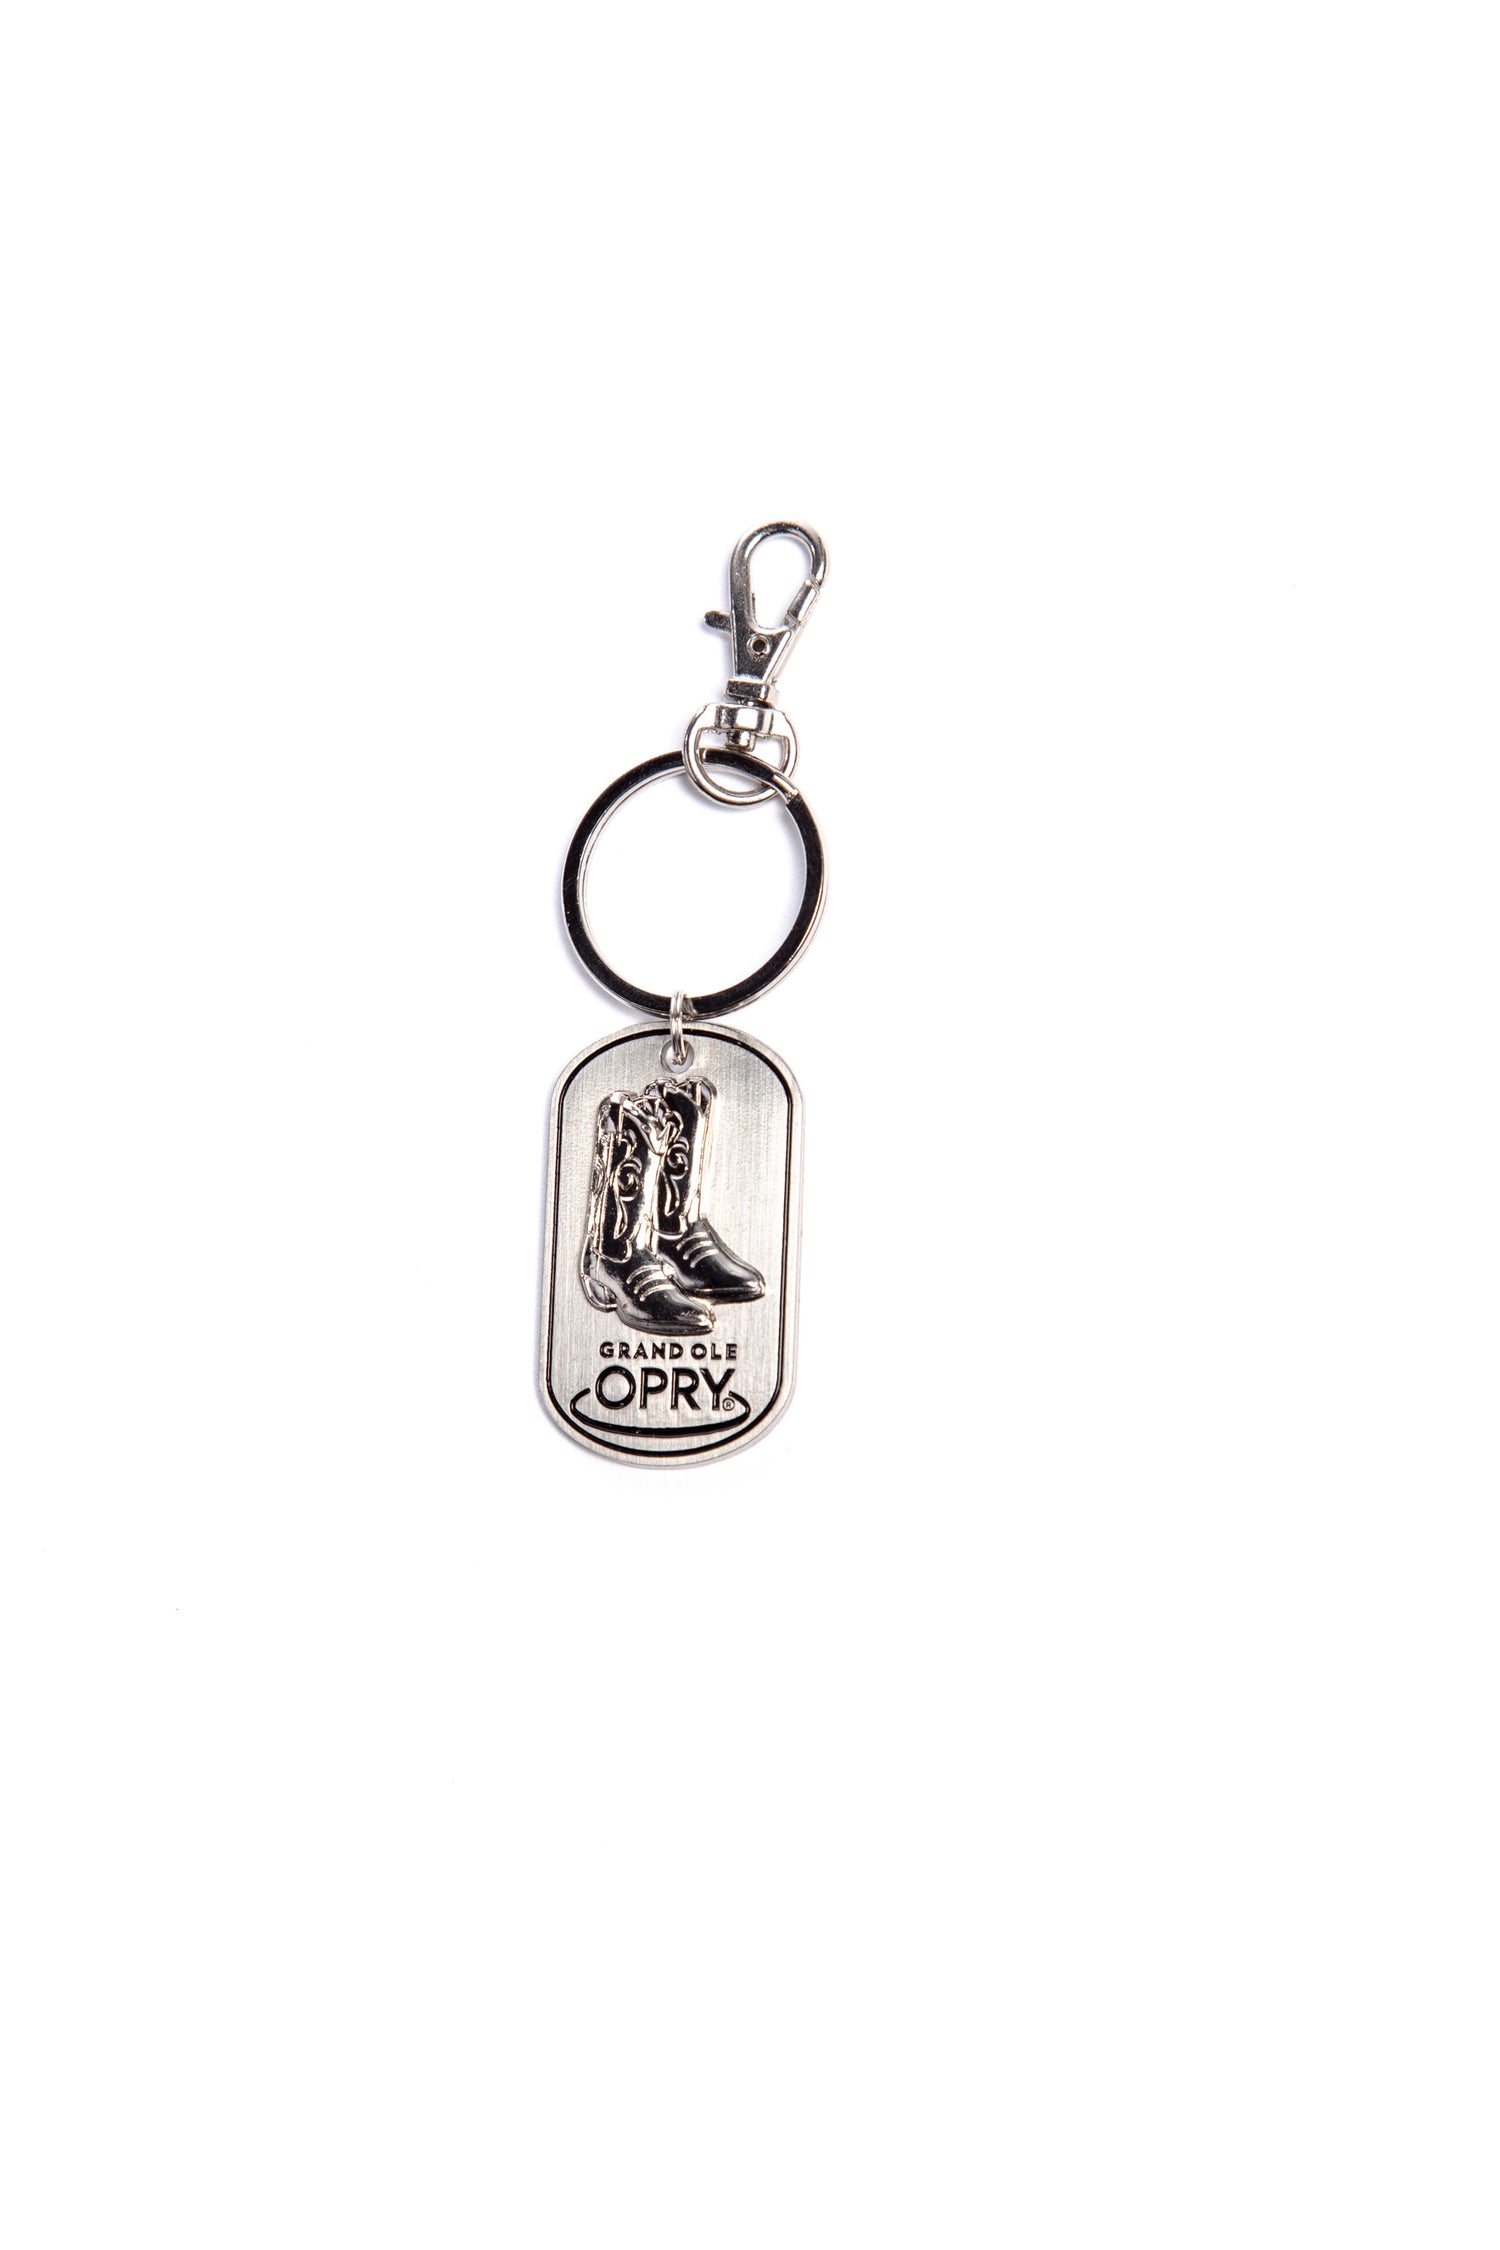 Opry Boots Dog Tag Keychain